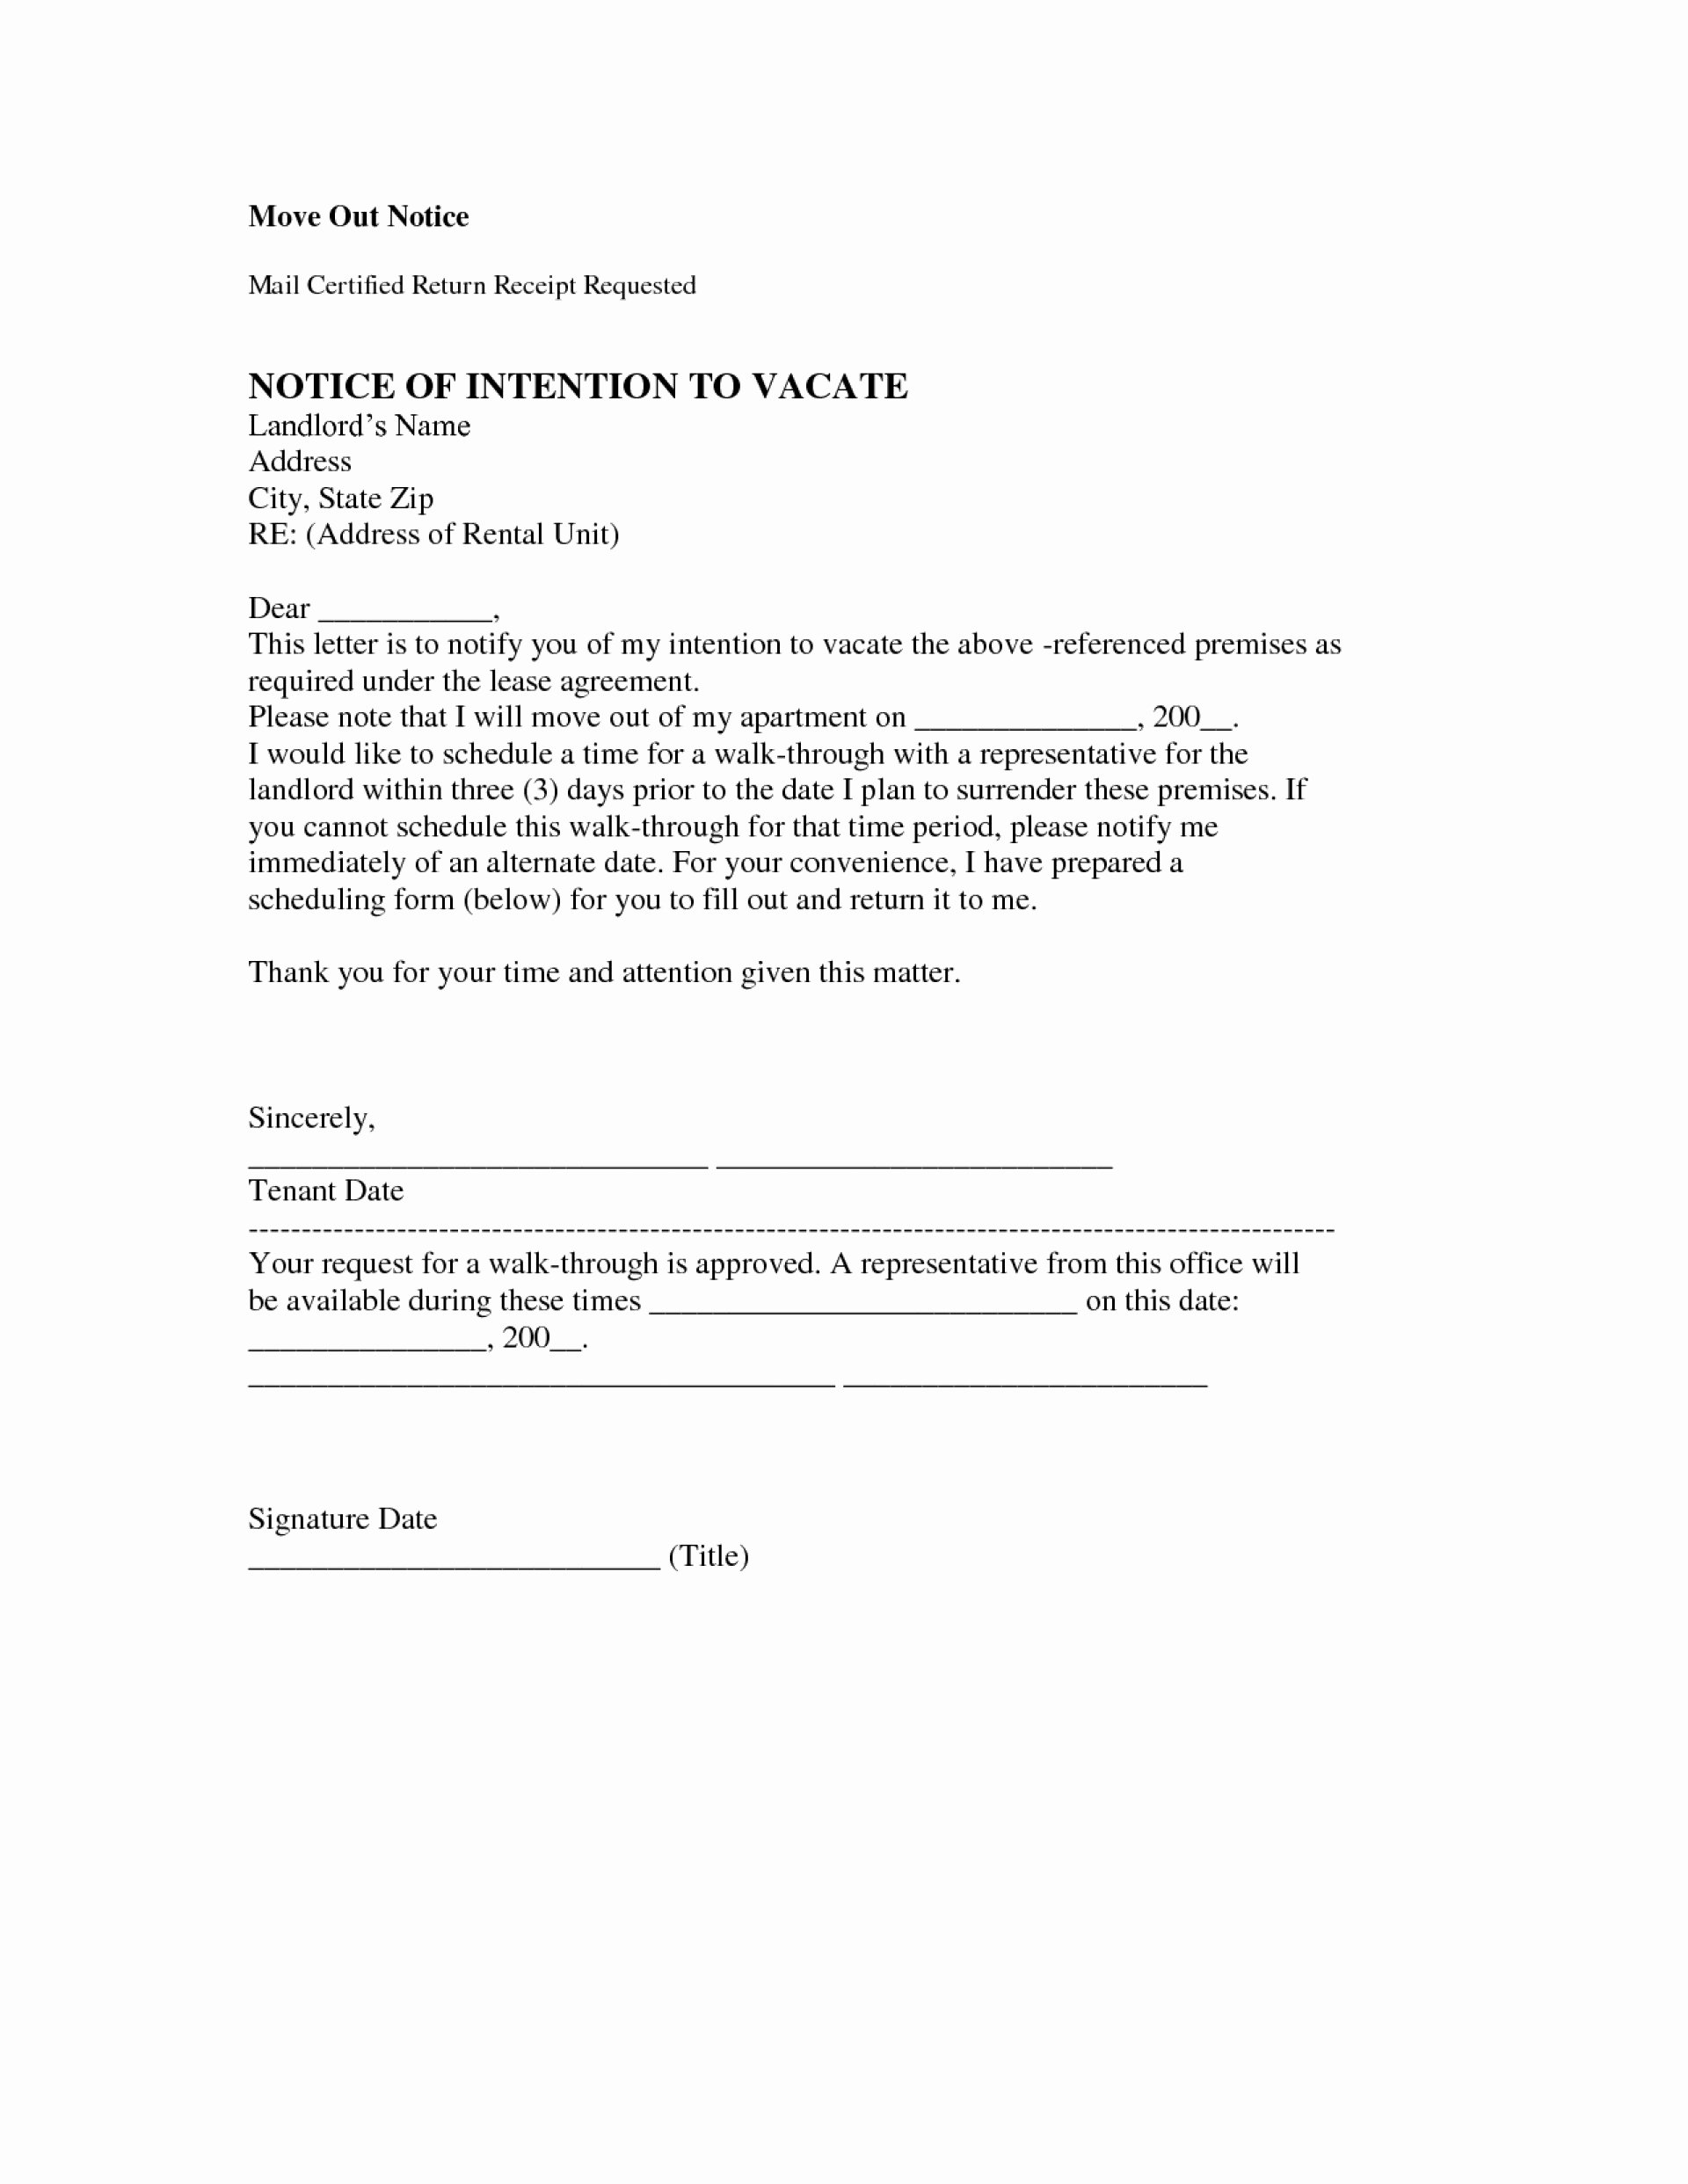 Intent to Vacate Apartment Luxury Vacating Apartment Letter Sample form Template